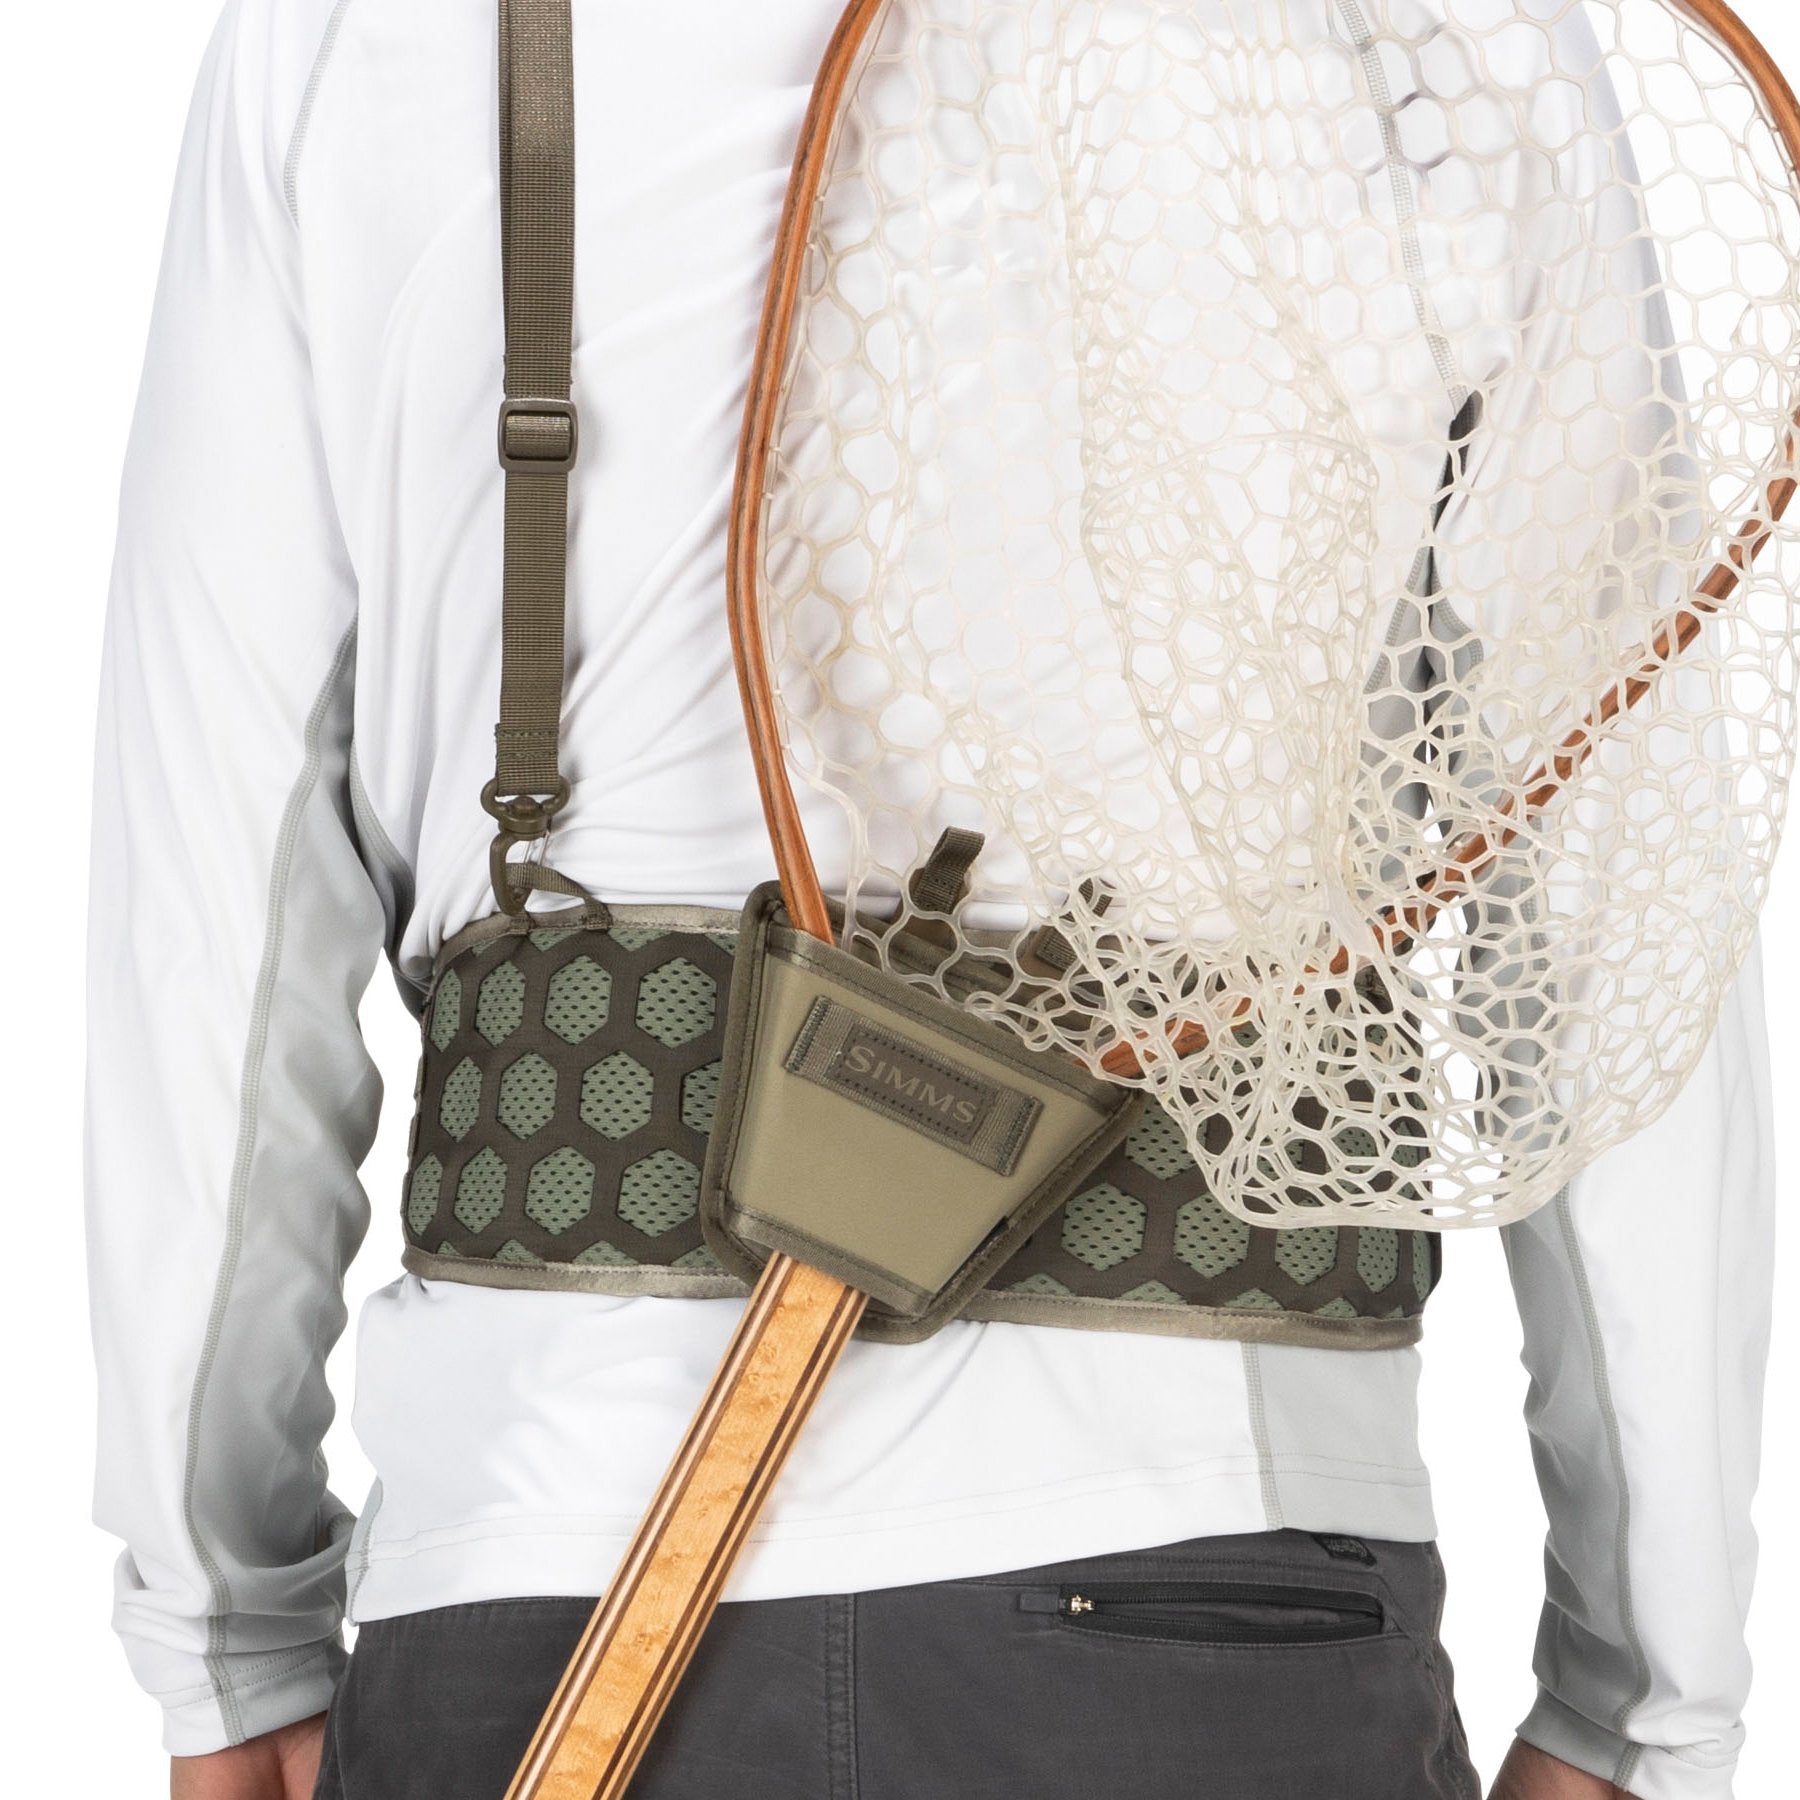 The Simms Flyweight Net Holster easily washable,super durable - The Hook Up  Tackle Sales Shop